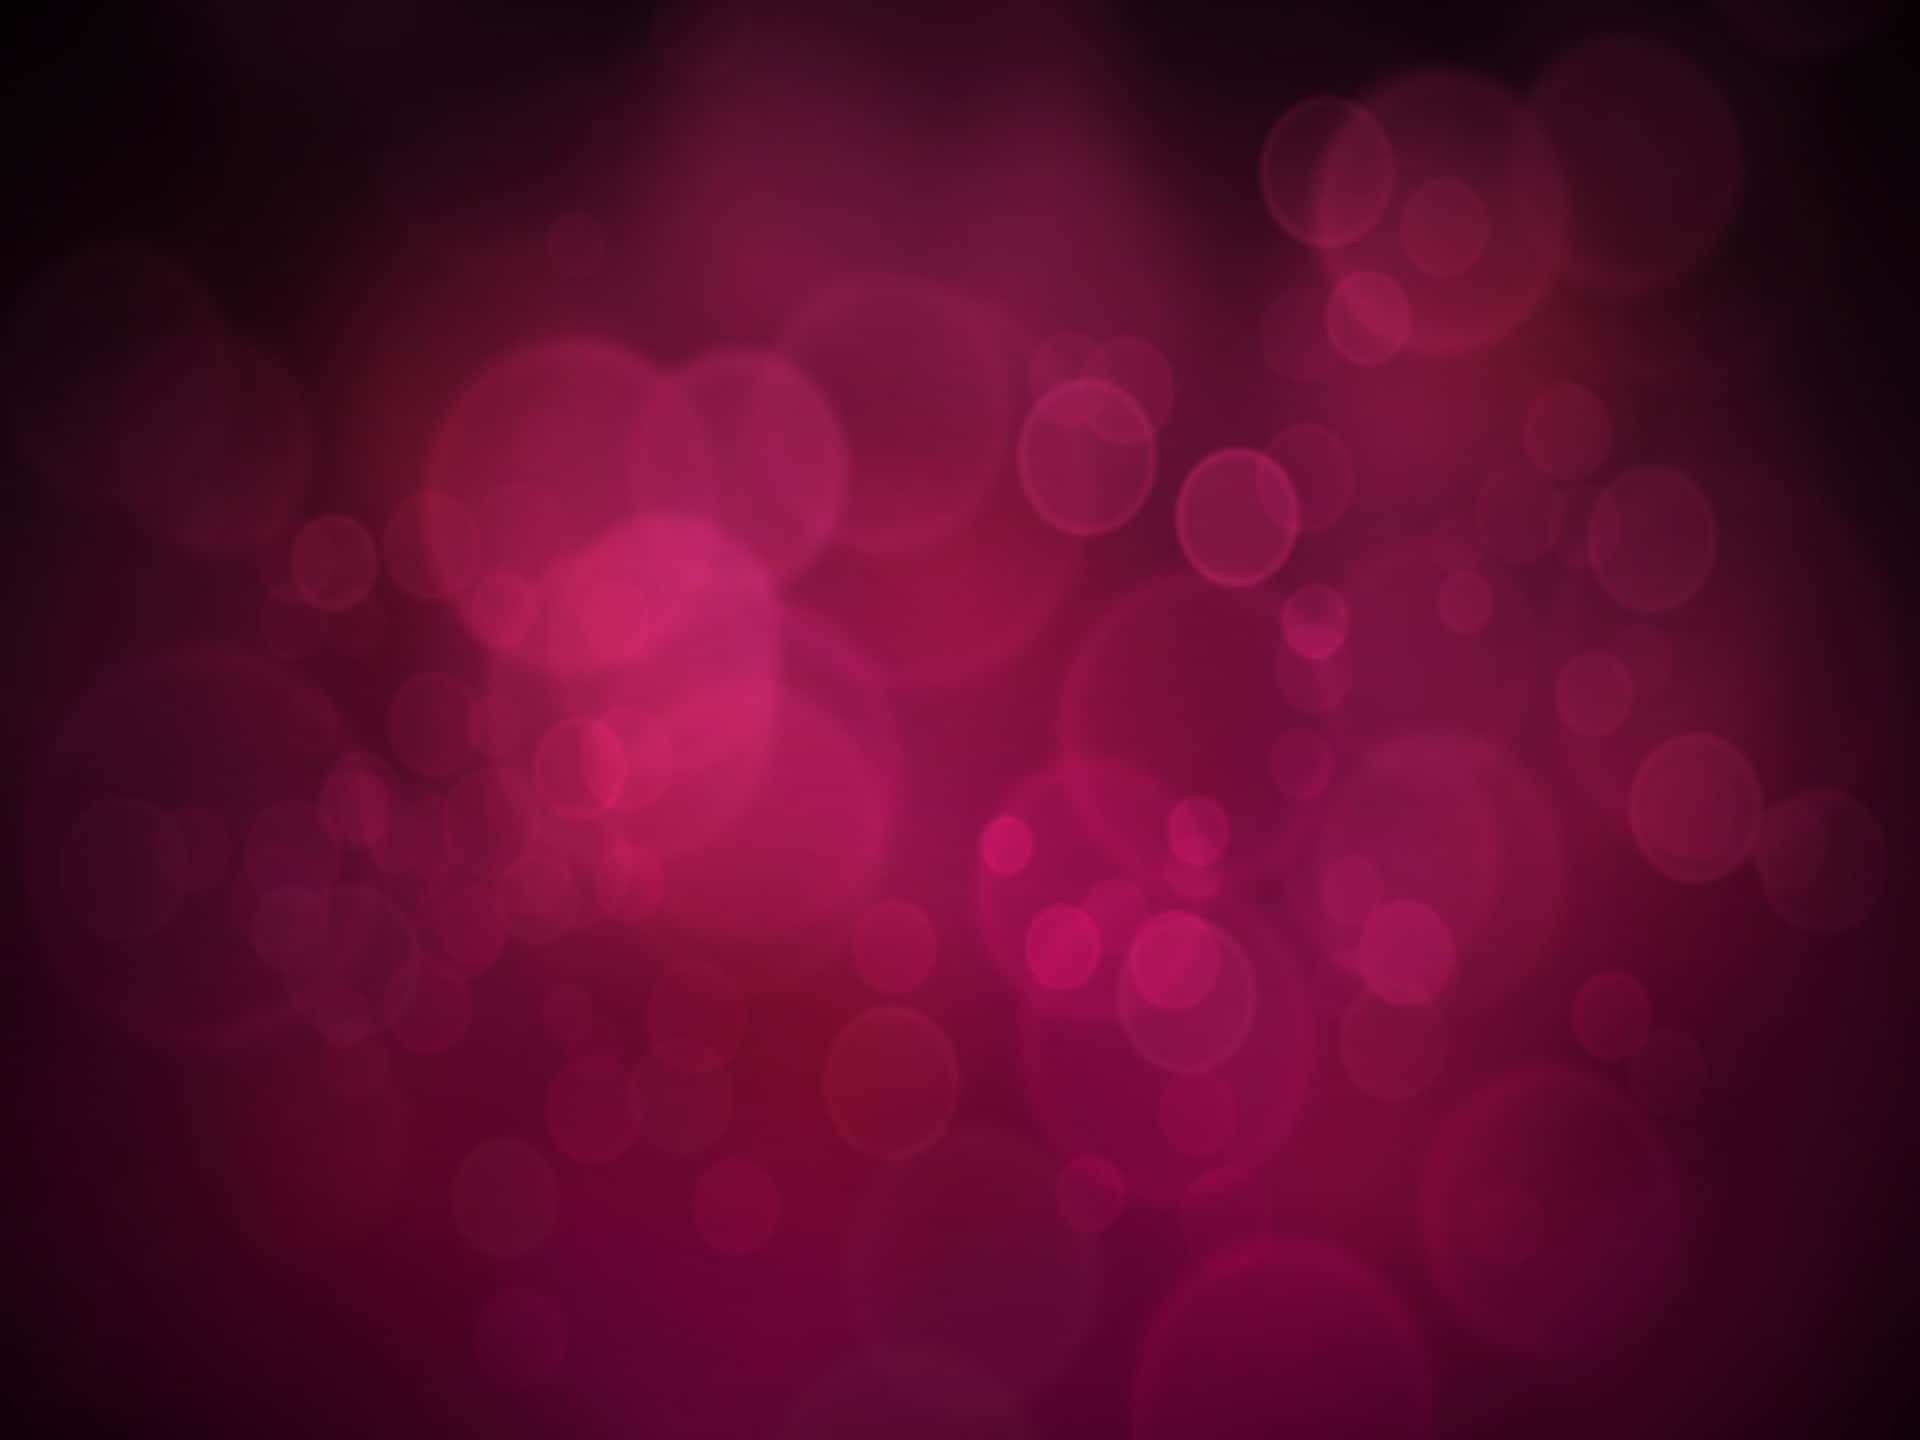 colorful blurred pink background. pink wallpaper. abstract dark